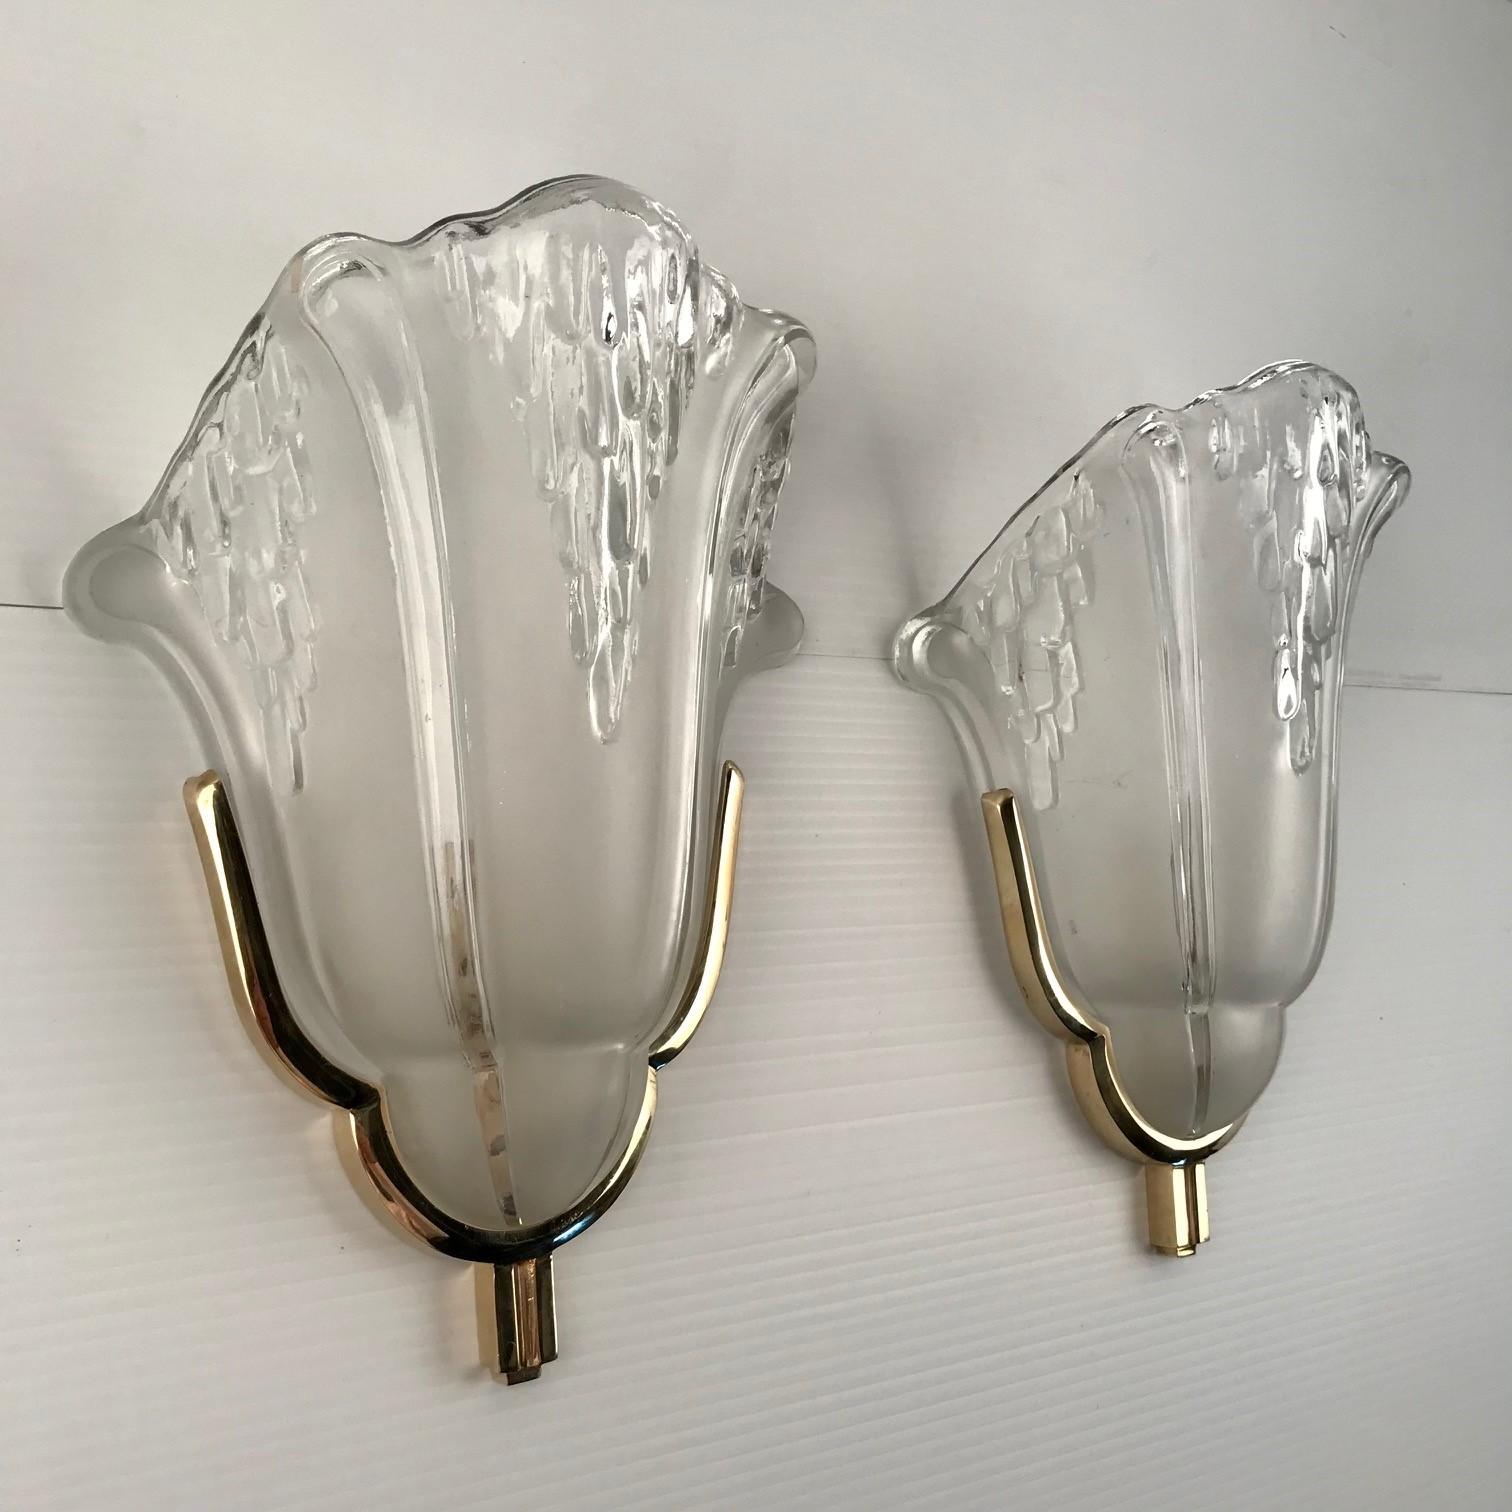  French Art Deco Wall Sconces by Petitot, 1930 Set of Four For Sale 3